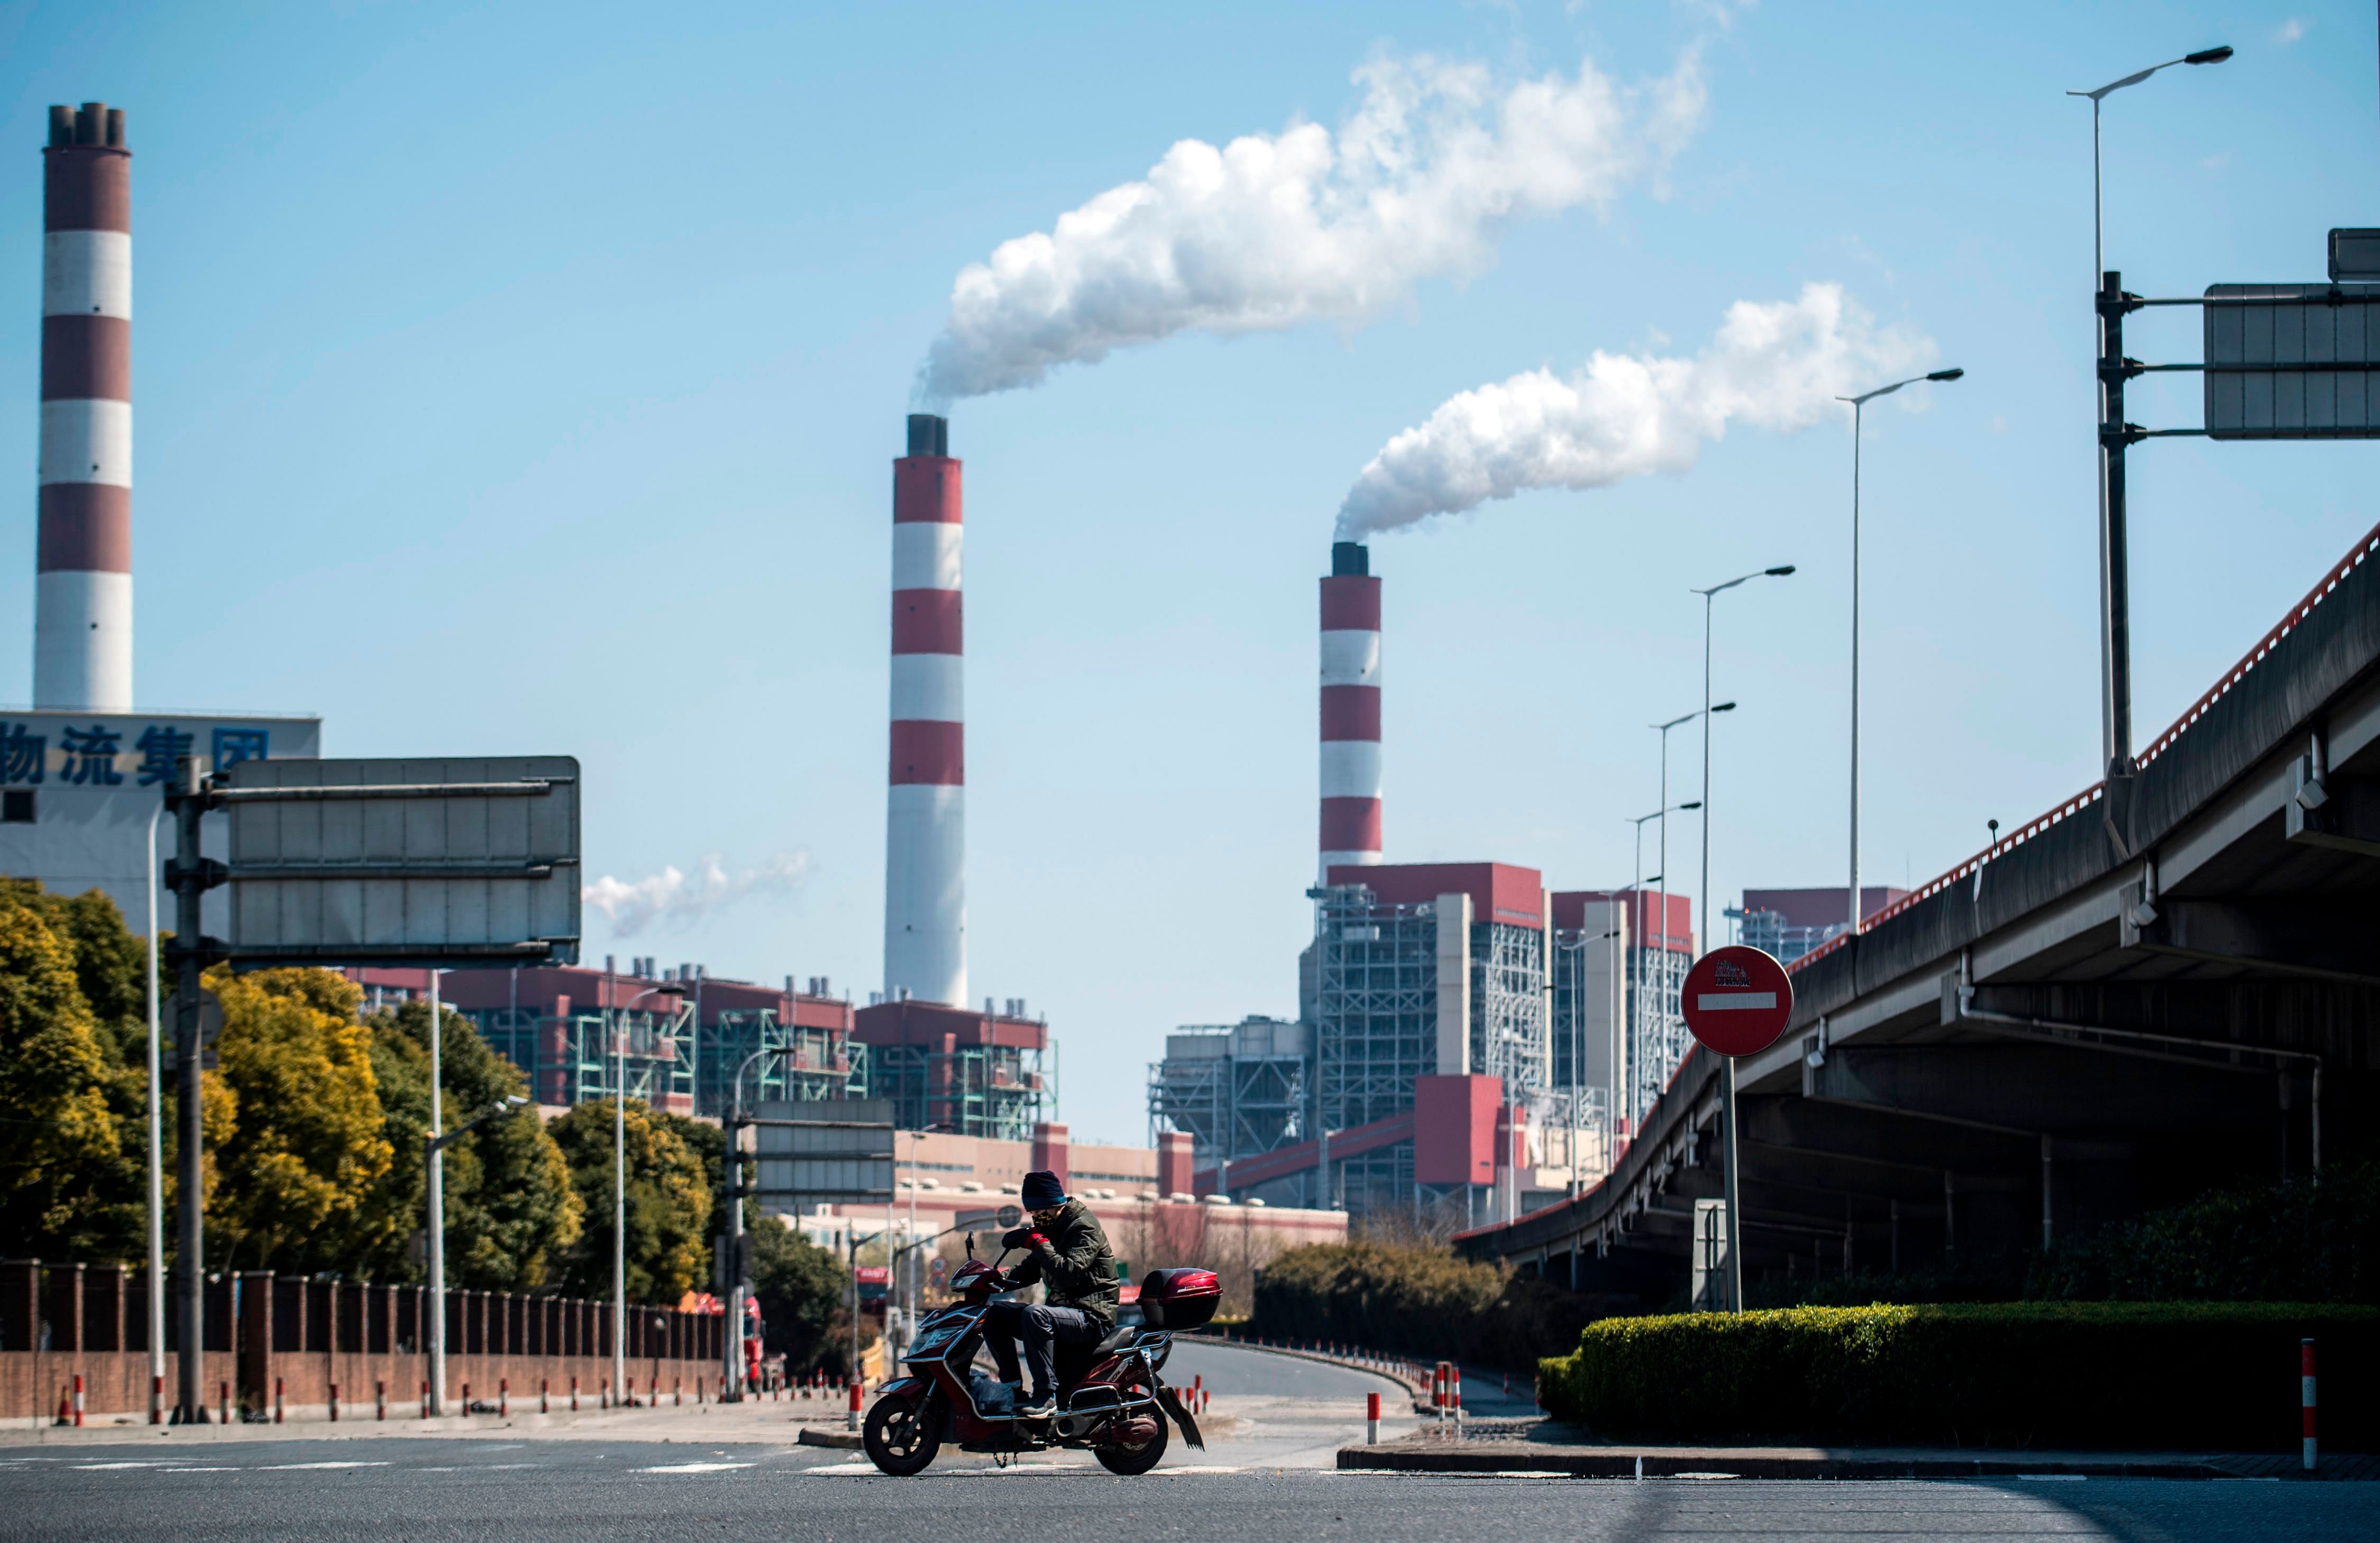 China cut its carbon intensity by 4.1% in 2019 from the previous year, according to environment ministry data. (Credit: AFP Photo)